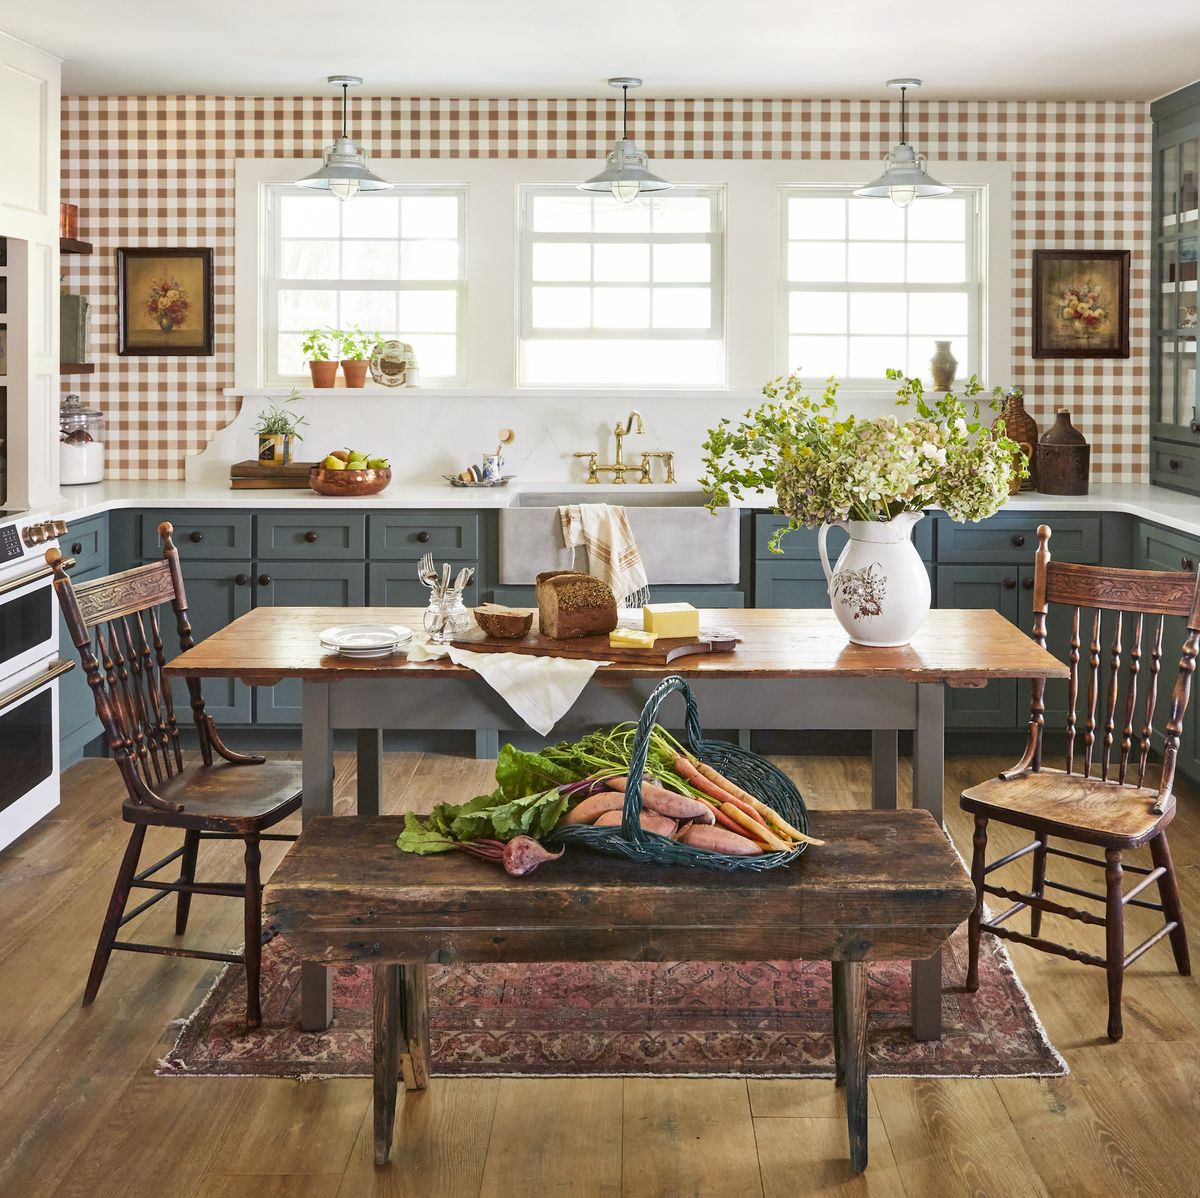 Stencil Ideas for Kitchen Cabinets: Transform Your Space with These Creative Inspirations